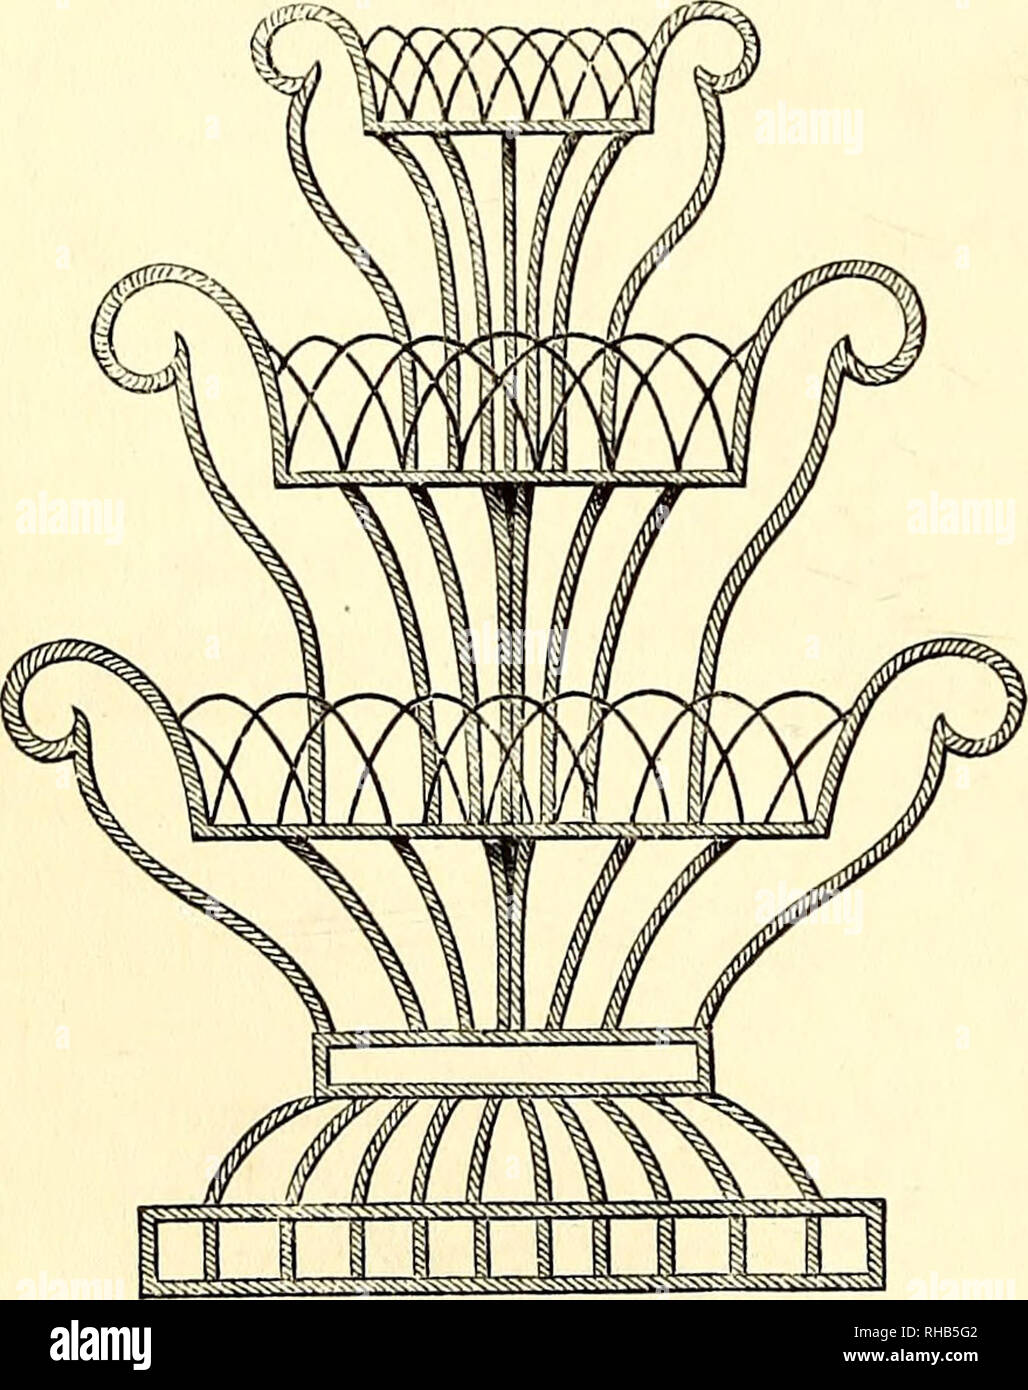 . The book of the garden. Gardening. her grace's private portfolio of drawings. They are formed of strong narrow hoop- Fig. 937.. iron, which gives them a more substantial appearance, as well as, in reality, a degree Figs. 938. 939. of firmness and durability which the wire baskets in common use do not possess. They all stand, as it were, on plinths, either formed of open work or solid plates of iron—thus giving them the true appearance all subjects of this kind should show. In the manufacturing of rustic baskets it is next to useless to employ a carpenter. They work too much by square and rul Stock Photo